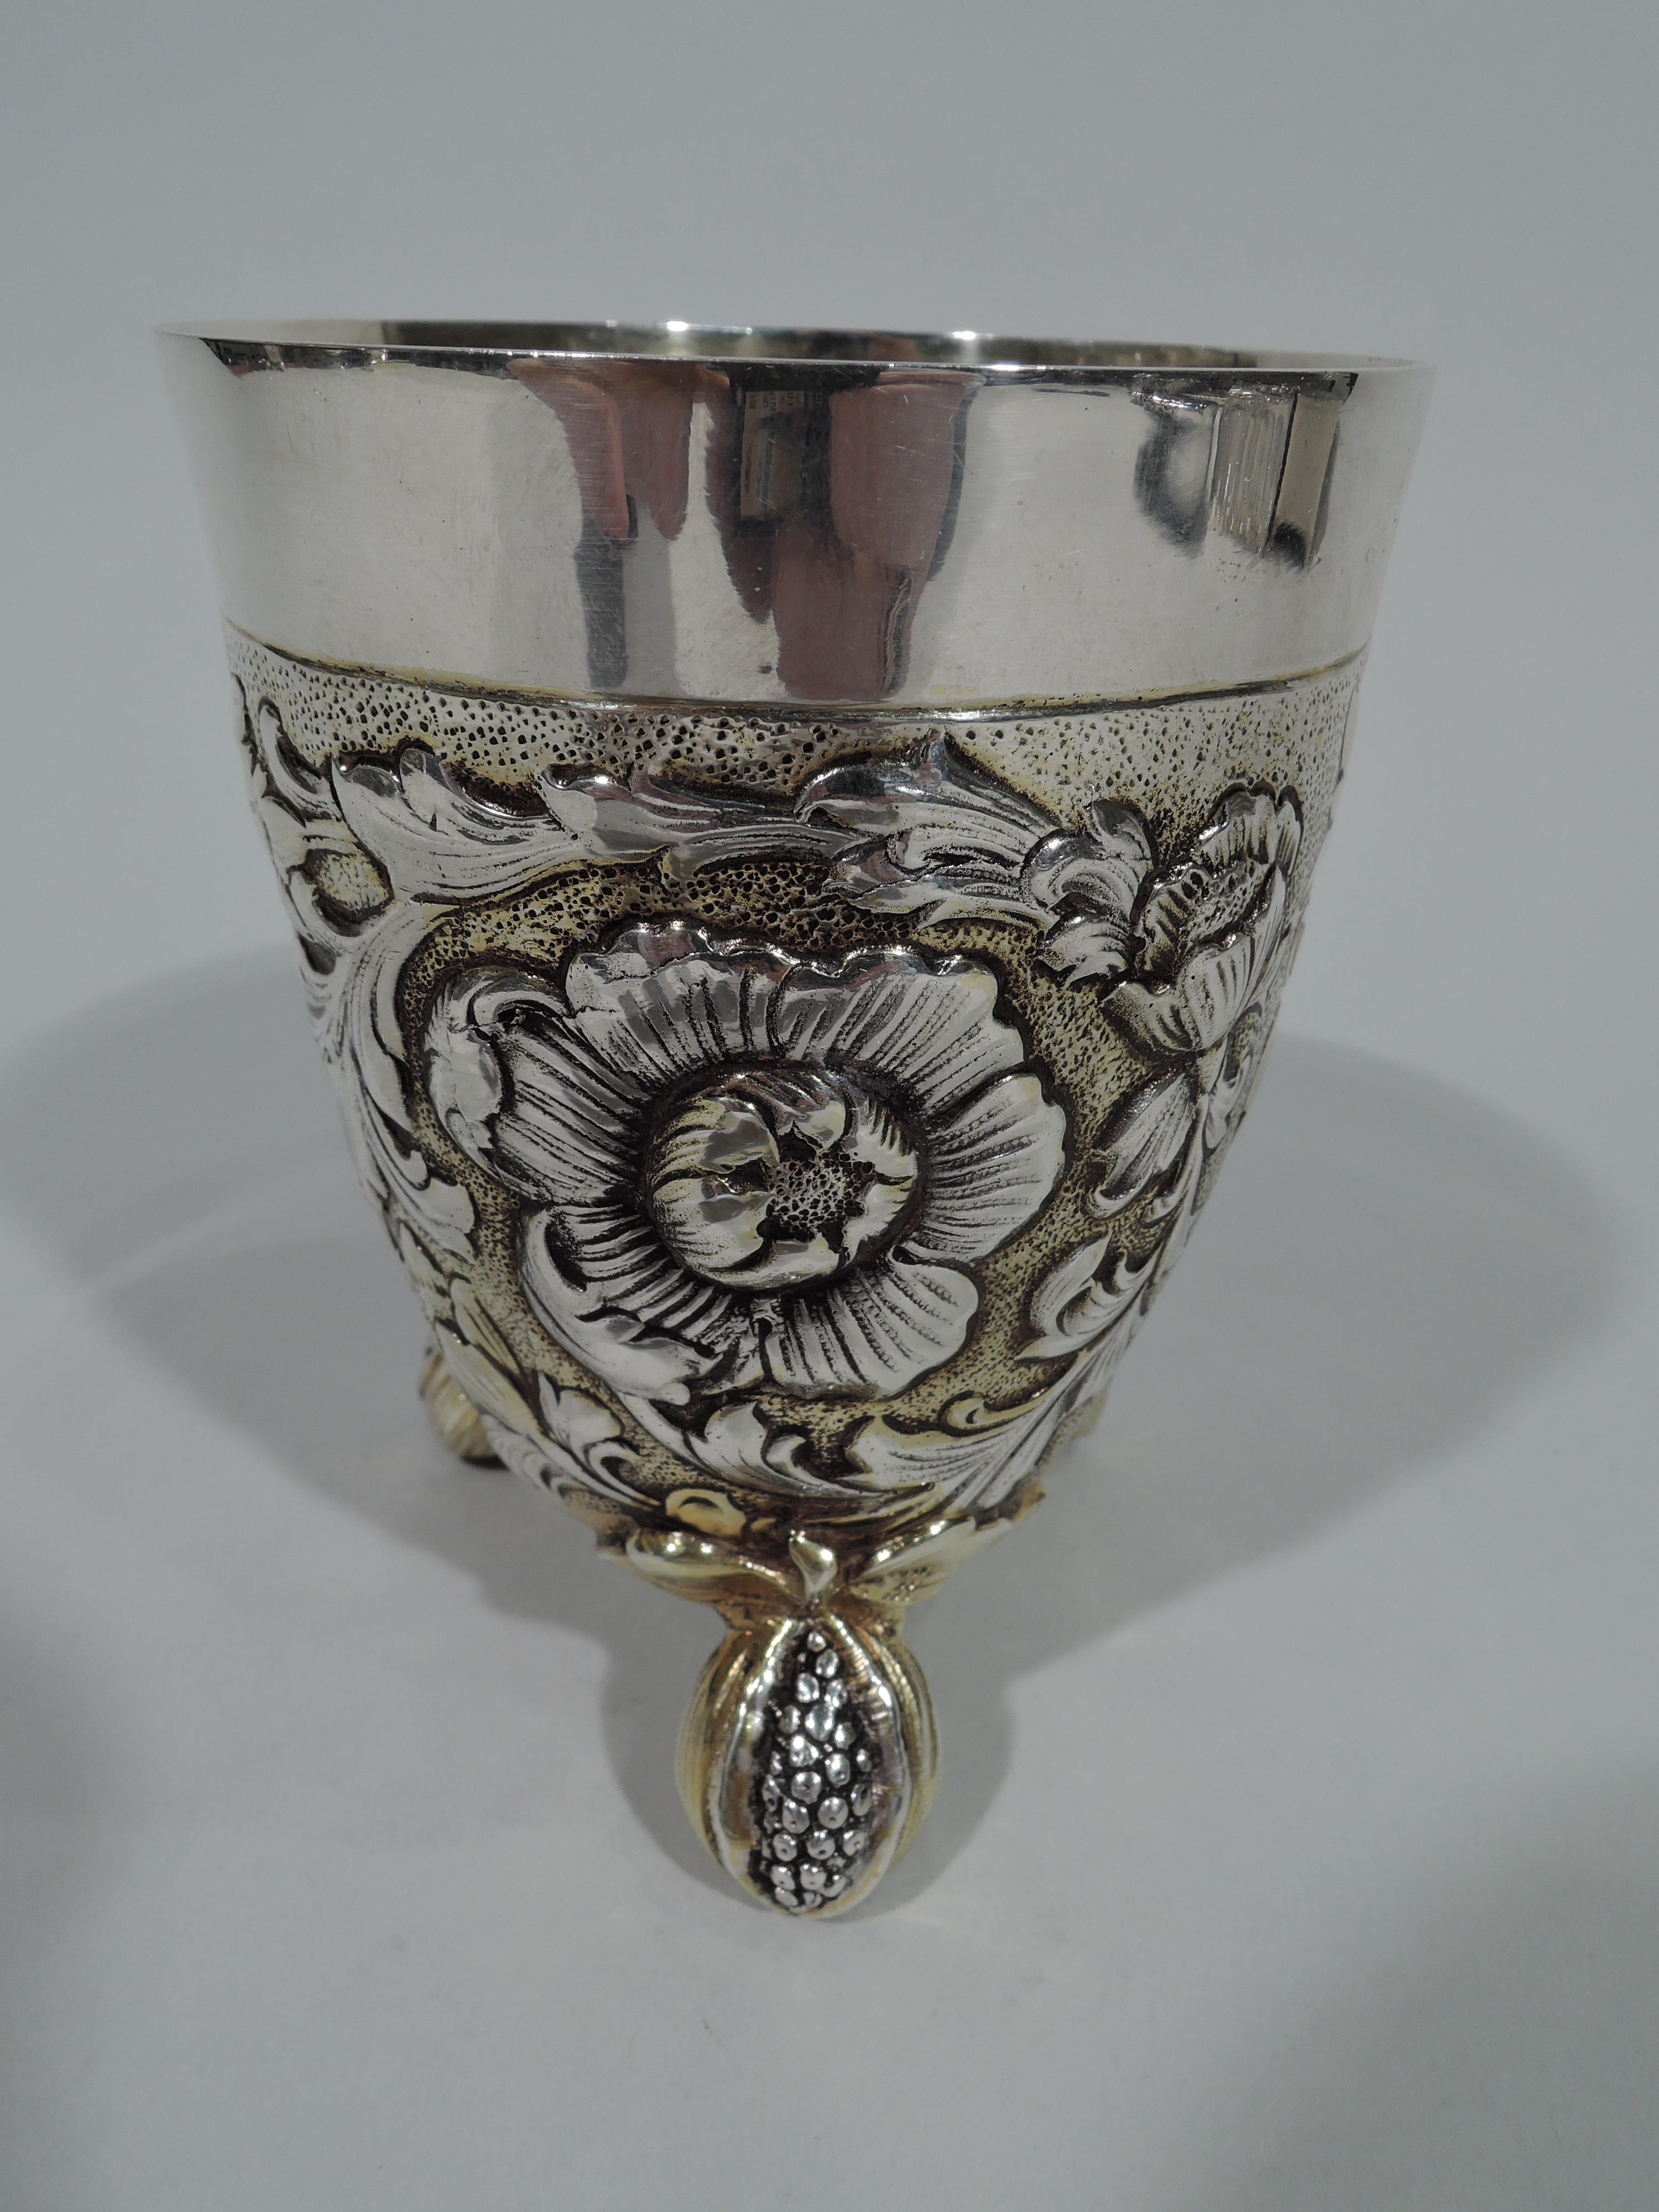 German Baroque-style parcel gilt 800 silver beaker, circa 1900. Tapering sides and curved bottom with 3 leaf-mounted pomegranate supports bursting with seeds. Chased and fluid rinceaux floral ornament on stippled ground. Interior gilt. Hallmarked.